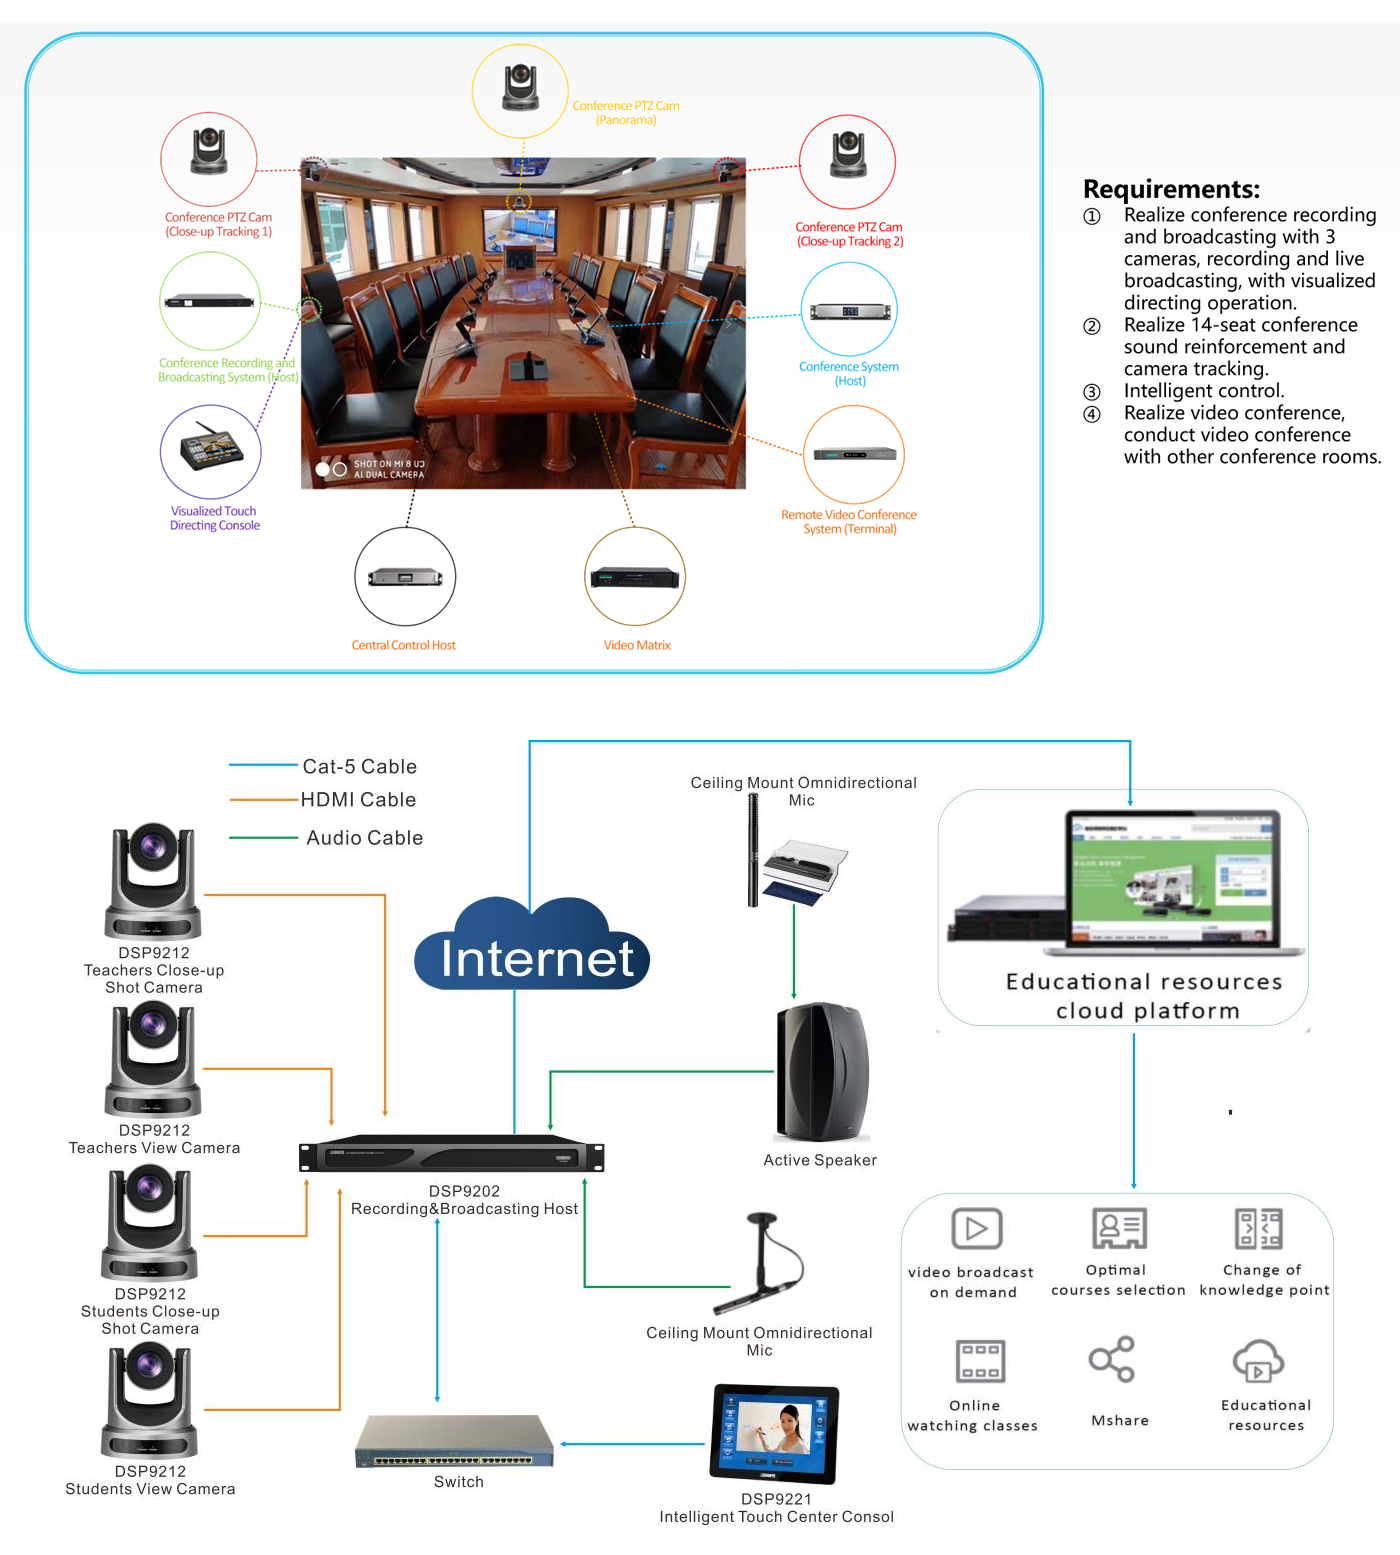 Conference-Recording-and-Broadcasting-System-Solution-Design.jpg